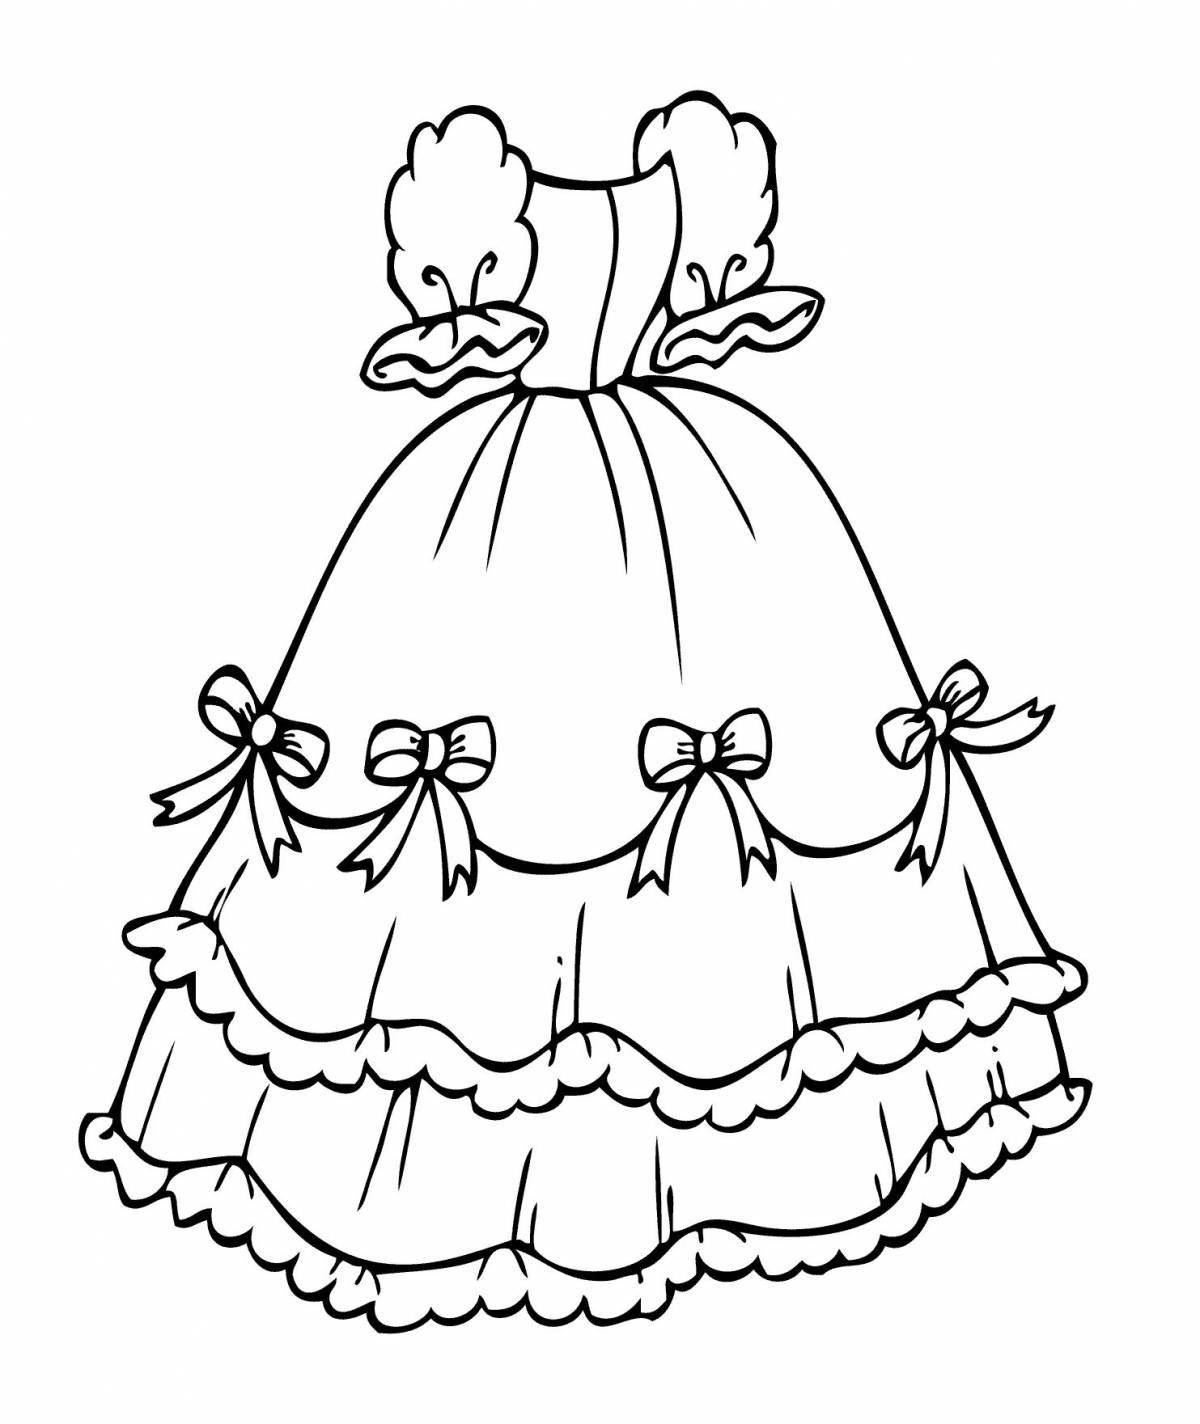 Coloring book colorful dress with clothes